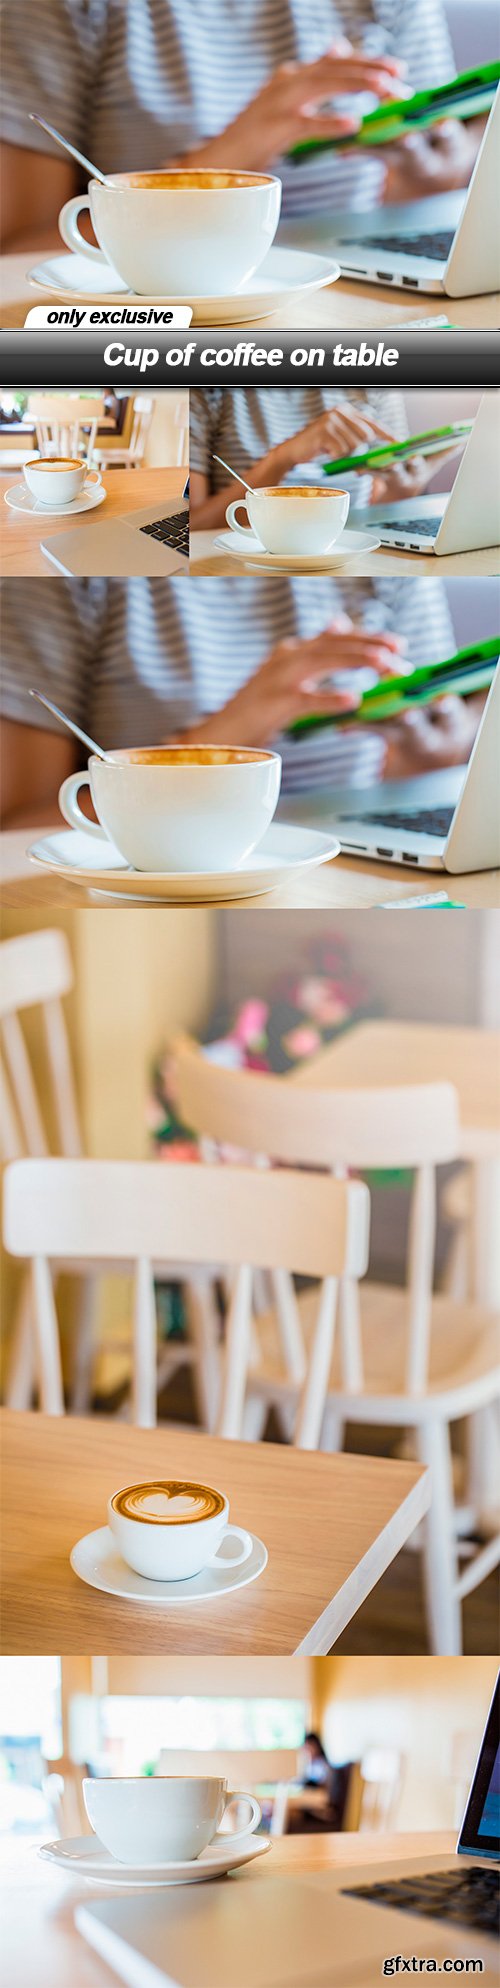 Cup of coffee on table - 5 UHQ JPEG